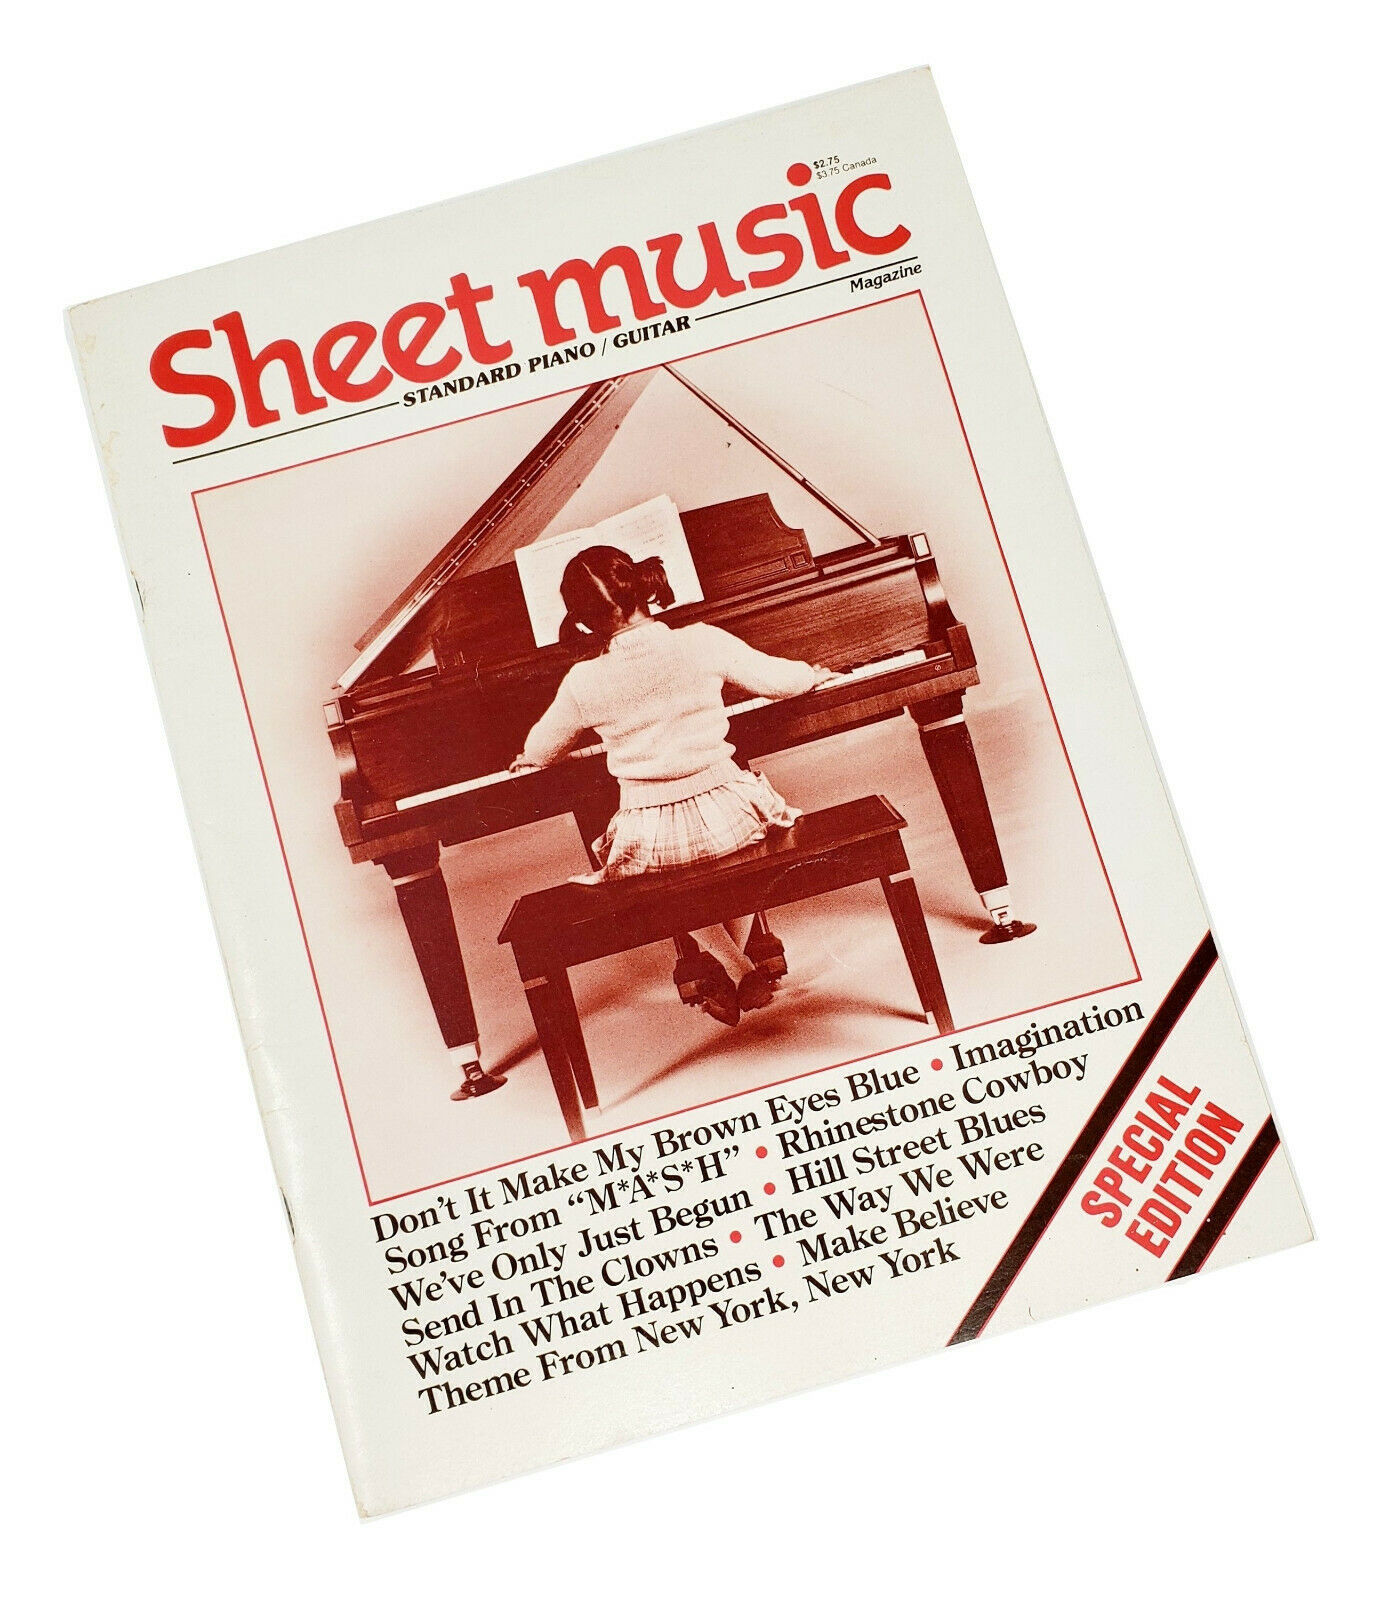 Primary image for Sheet Music Magazine Standard Piano/Guitar Special Edition 1986